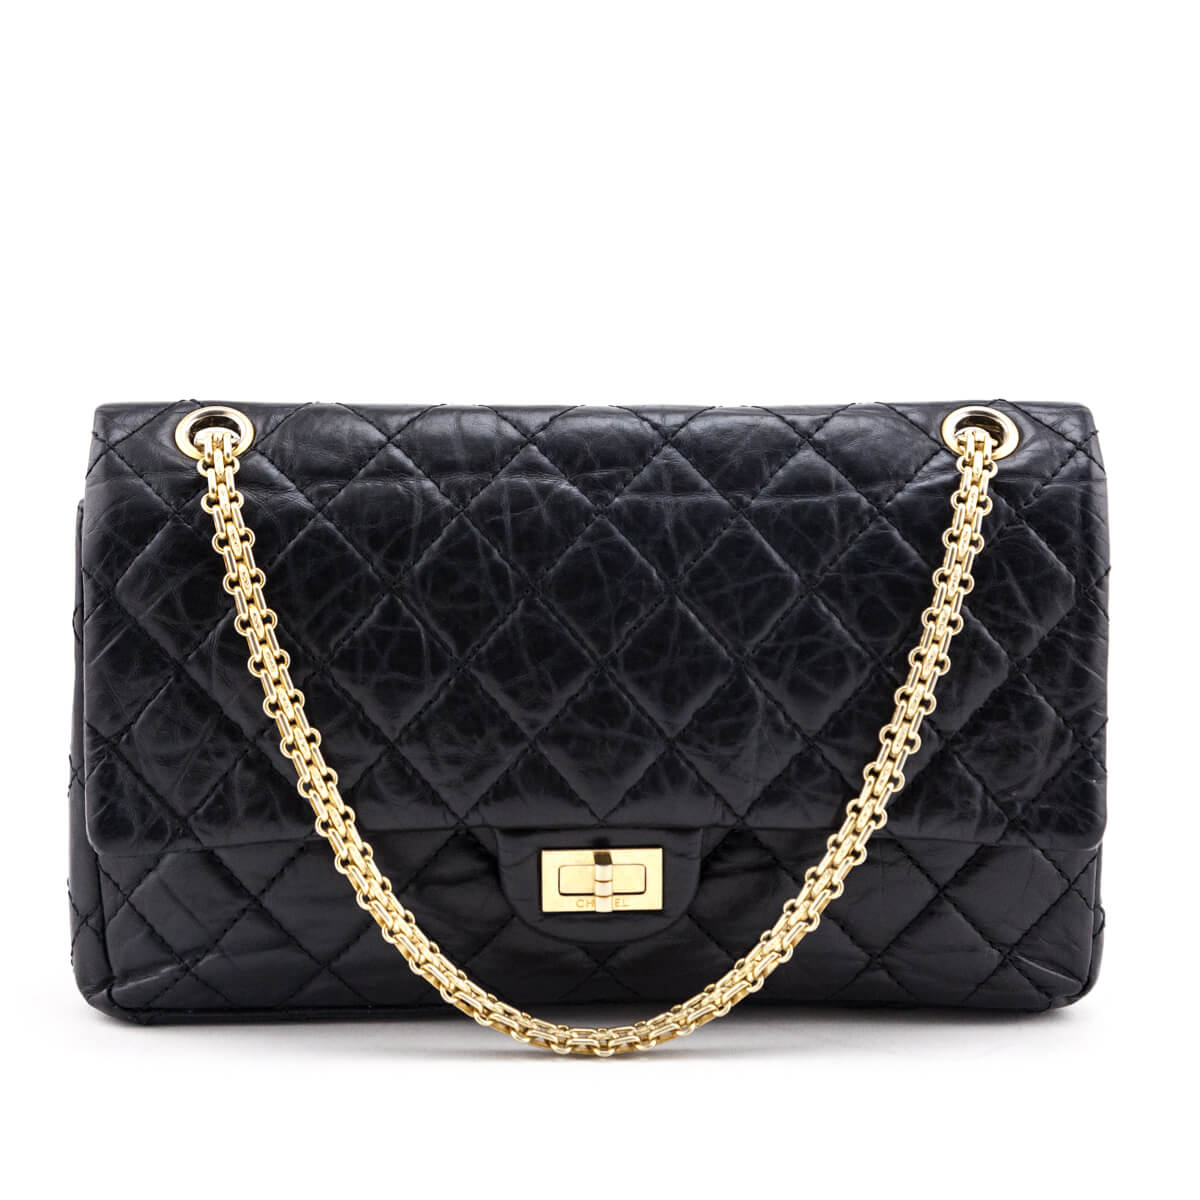 Buy Pre-Owned Chanel 2.55 Bags Online